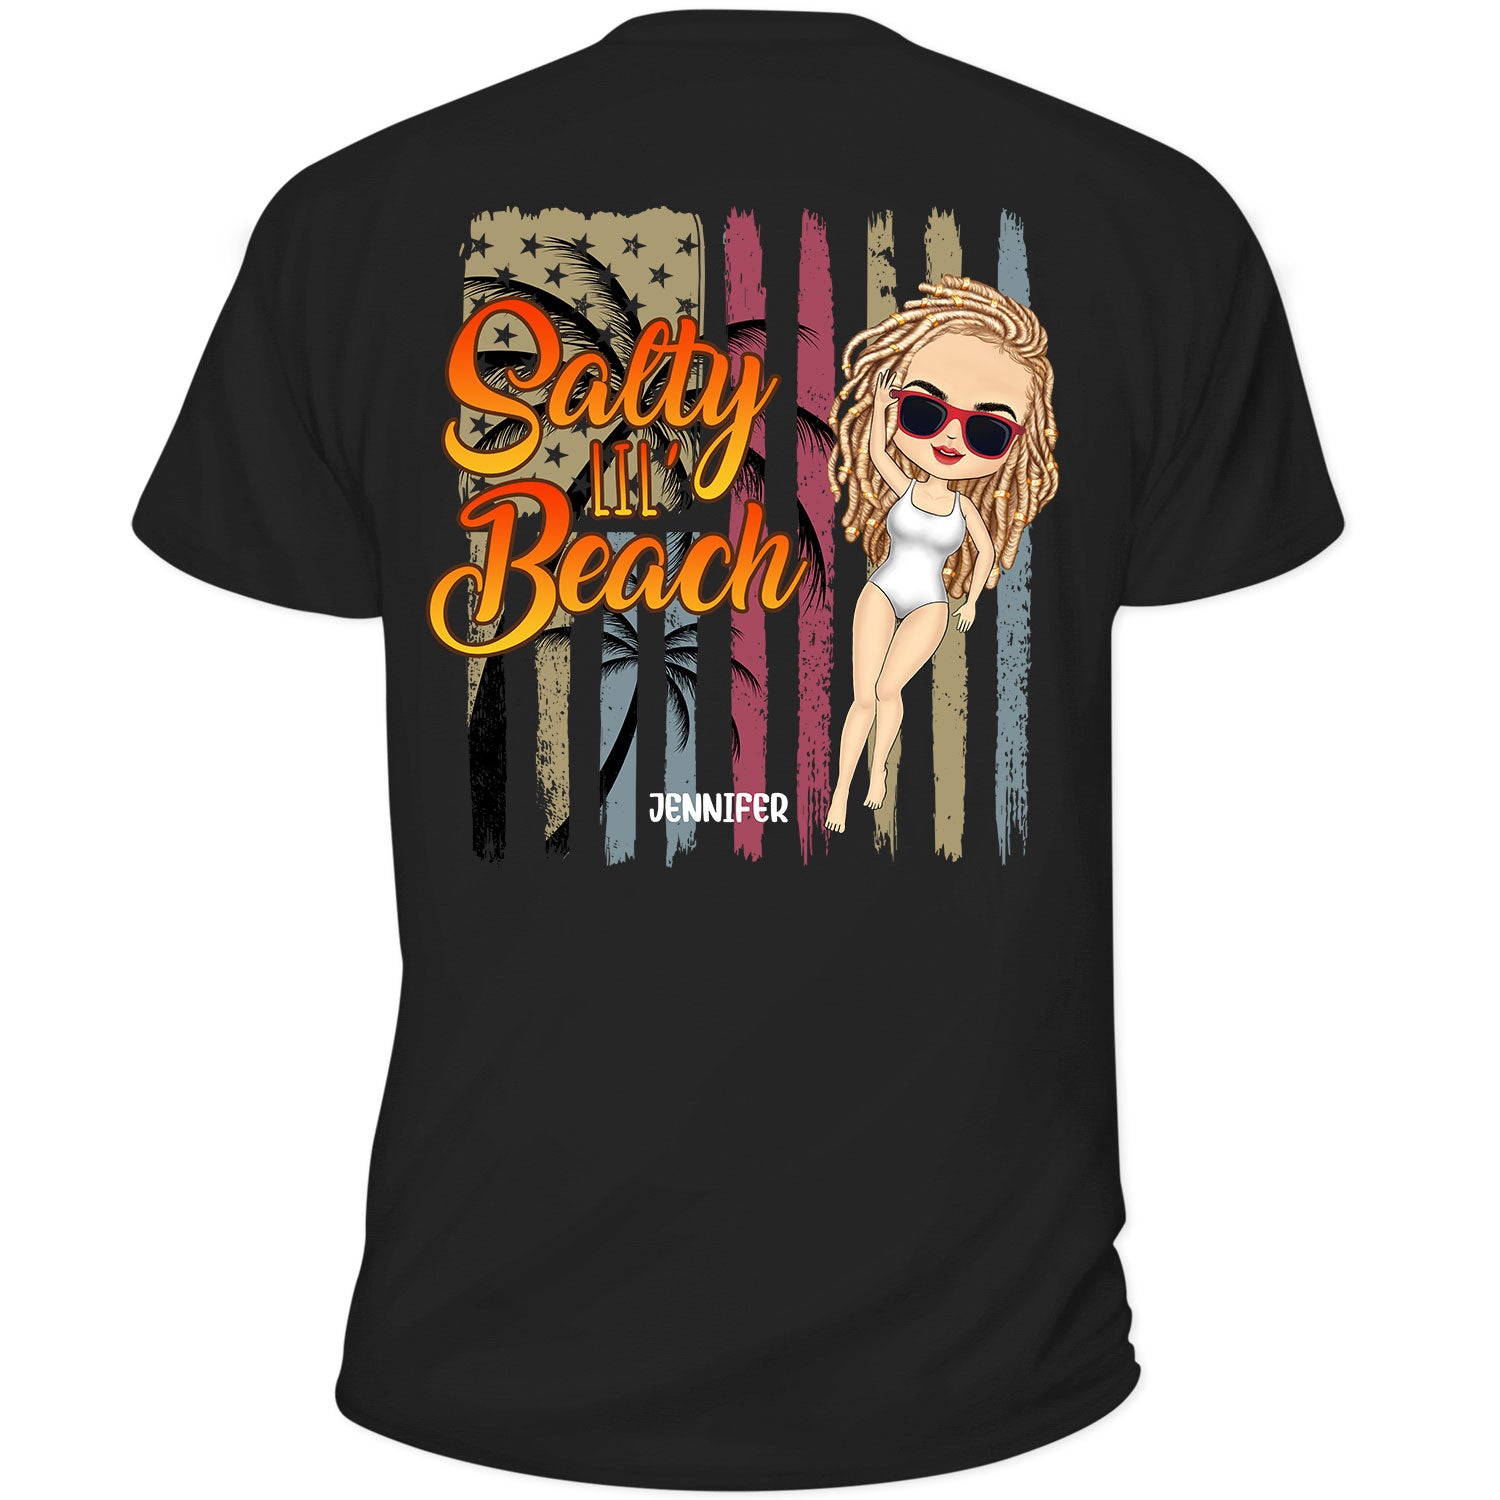 Salty Lil' Beach - Gift For Women, Gift For Yourself - Personalized Custom T Shirt